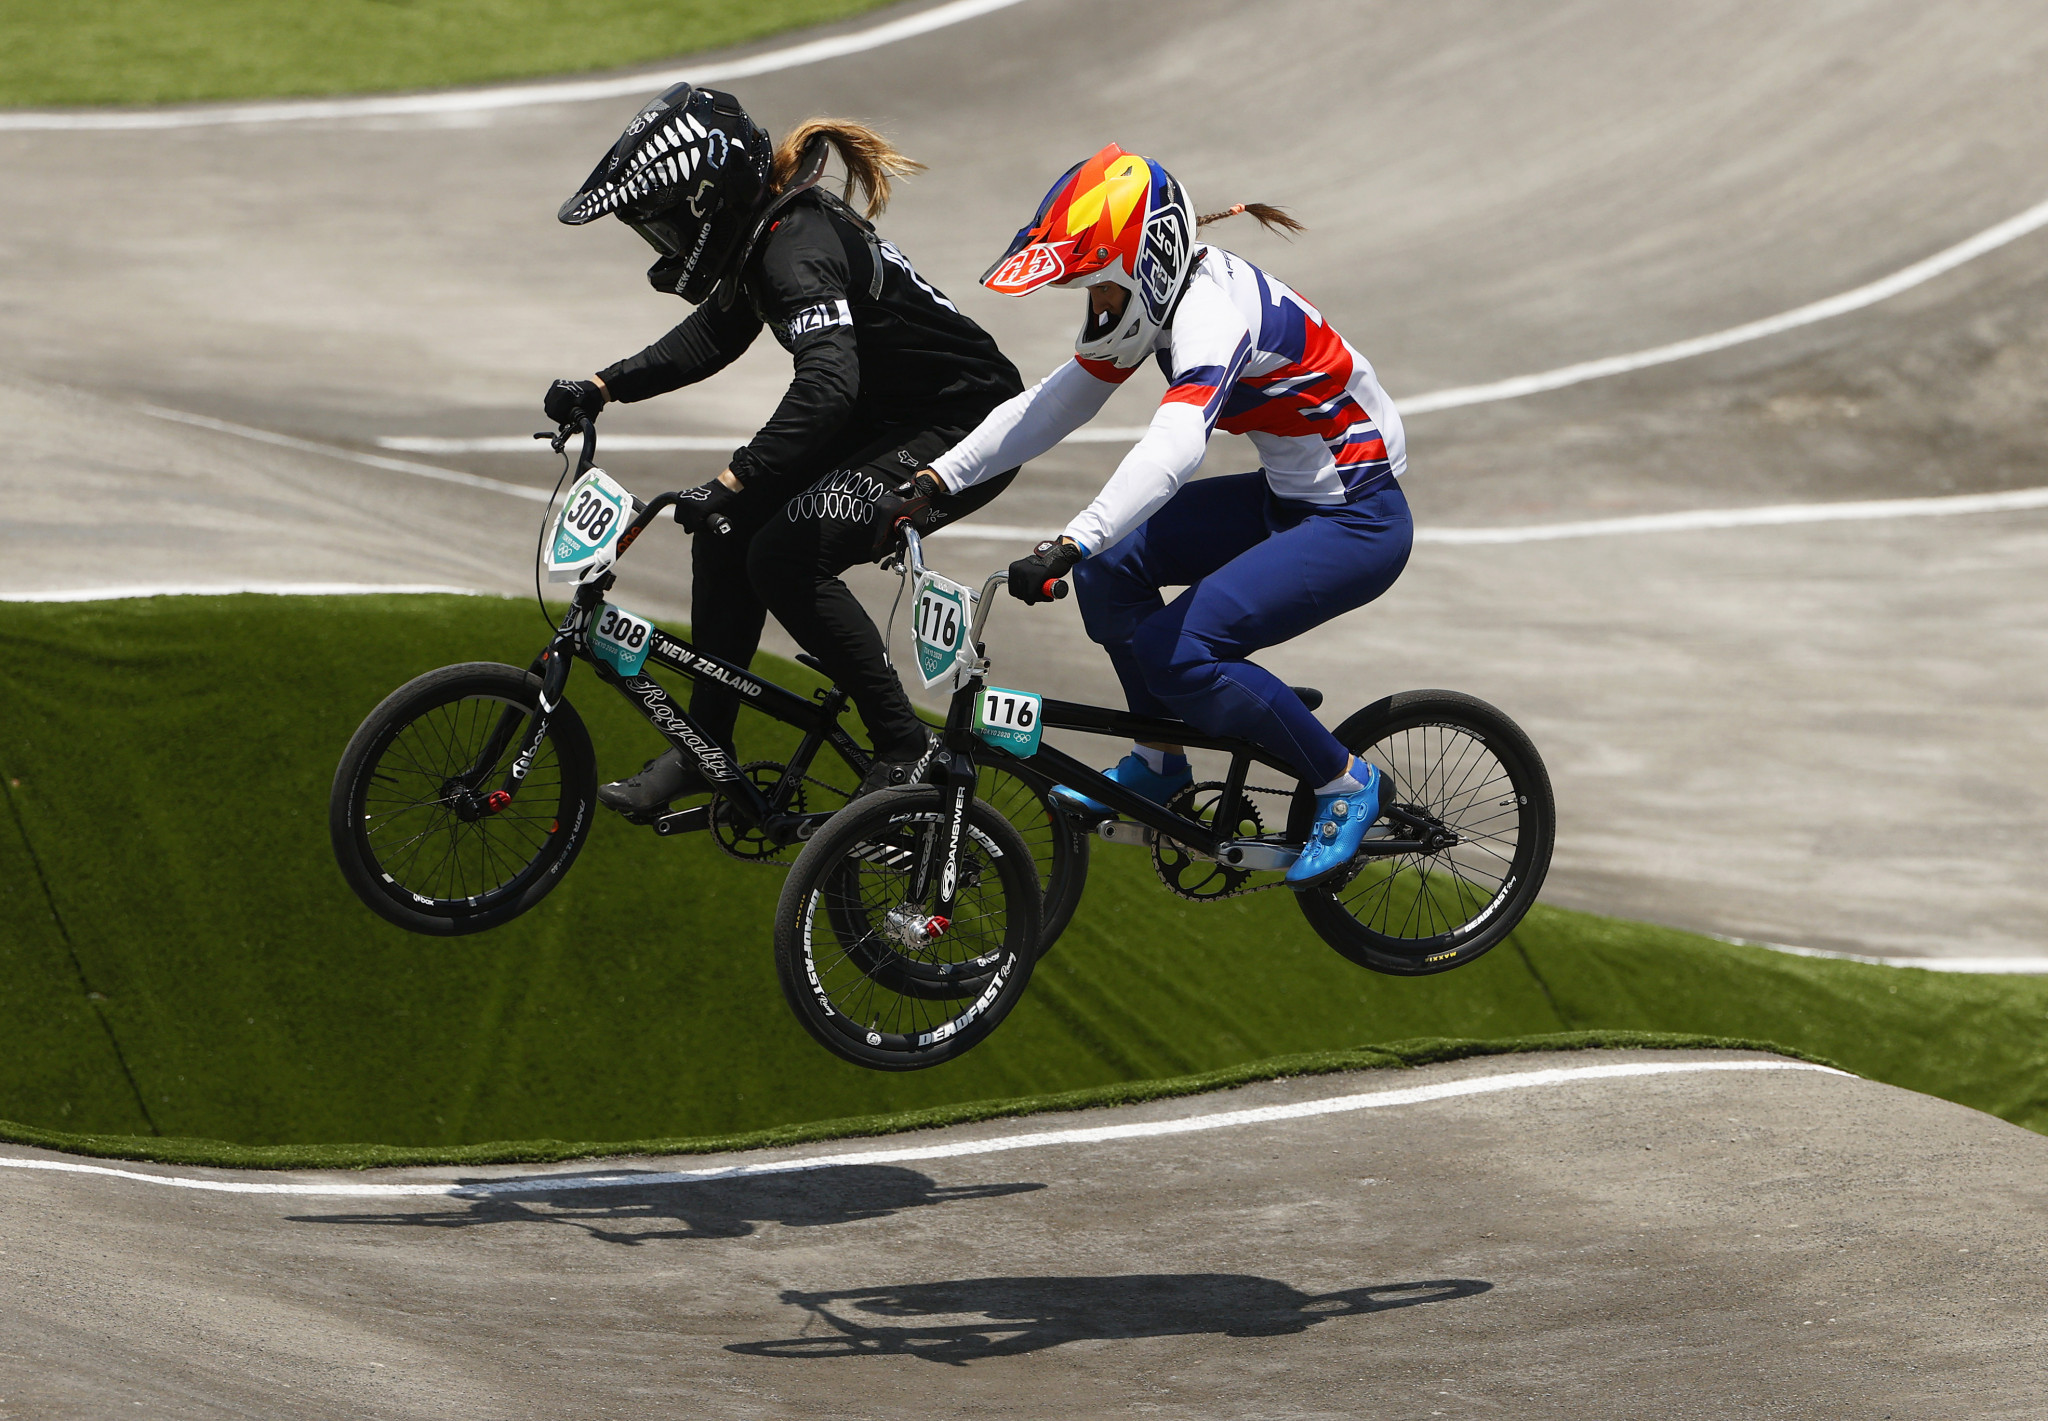 Australia's Bodi Turner won gold at the Oceania BMX Championships ©Getty Images